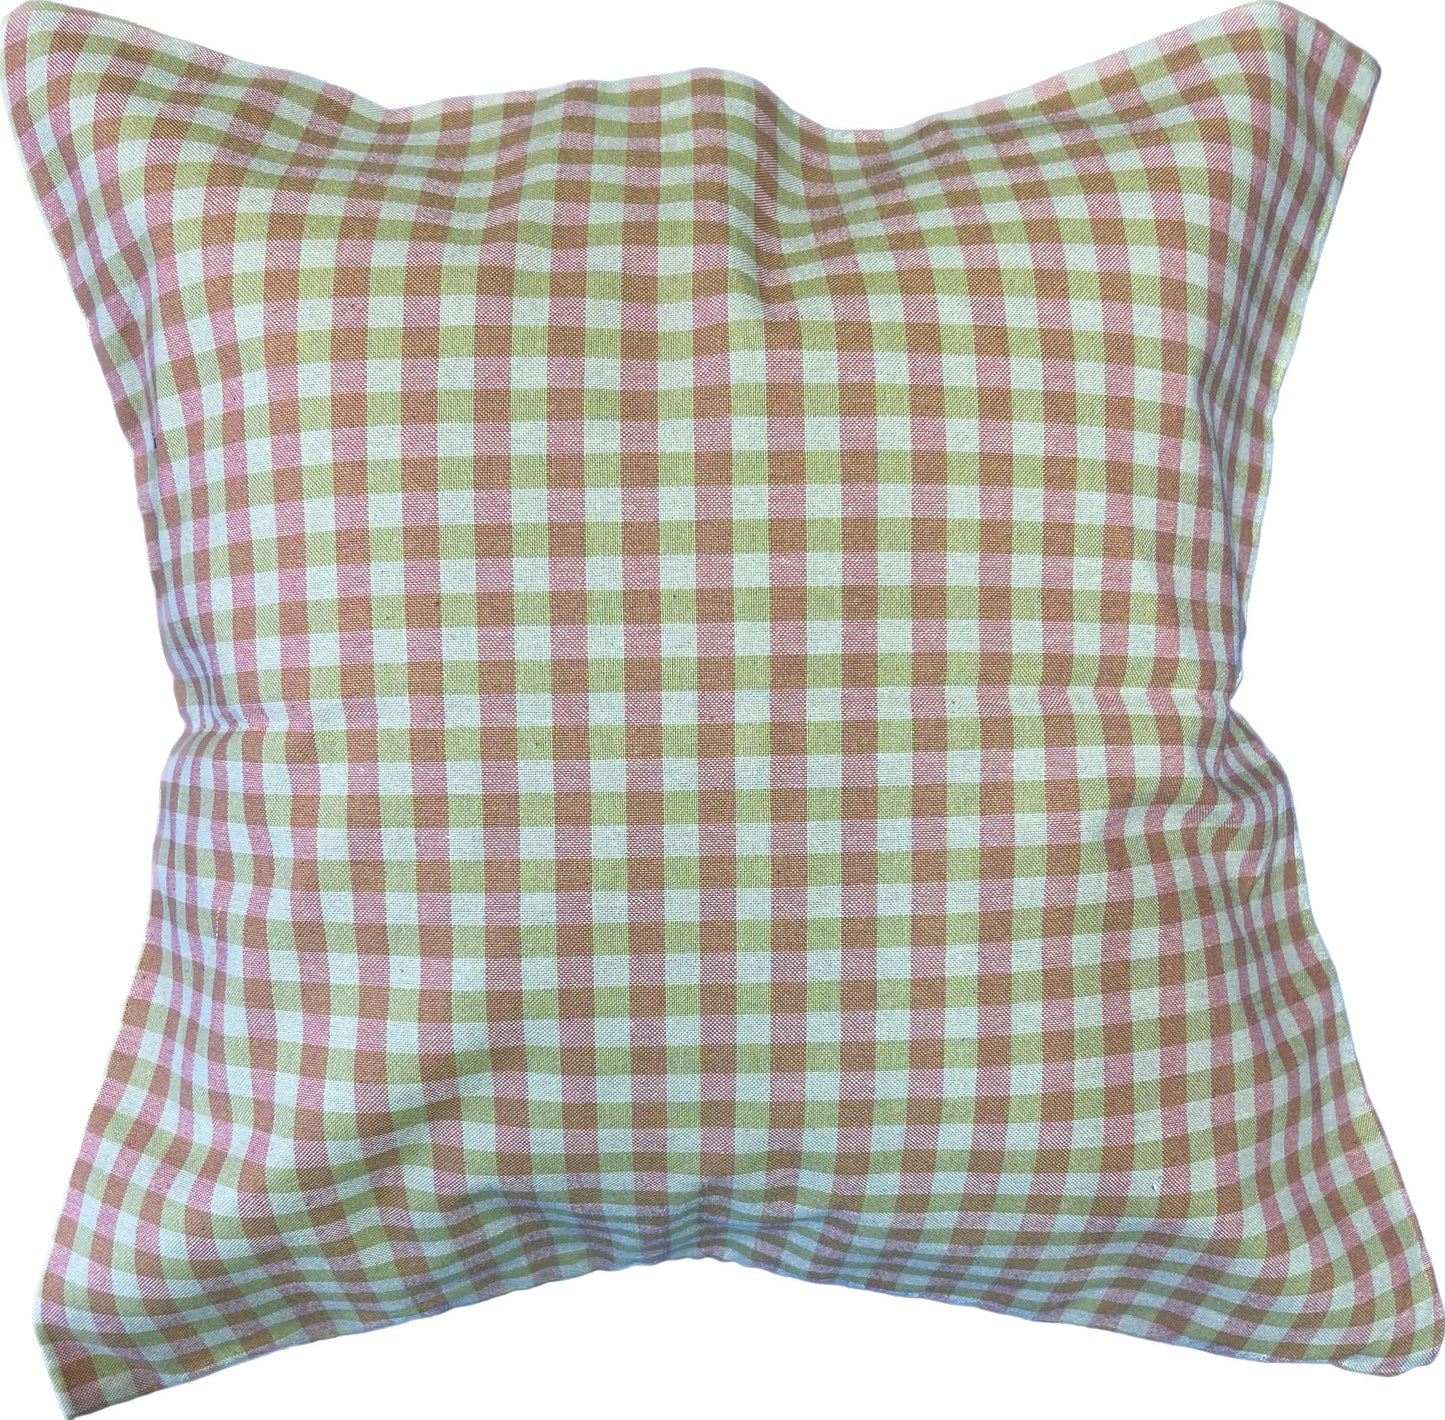 22"x22"   Square Pillow Cover*** Special Price***